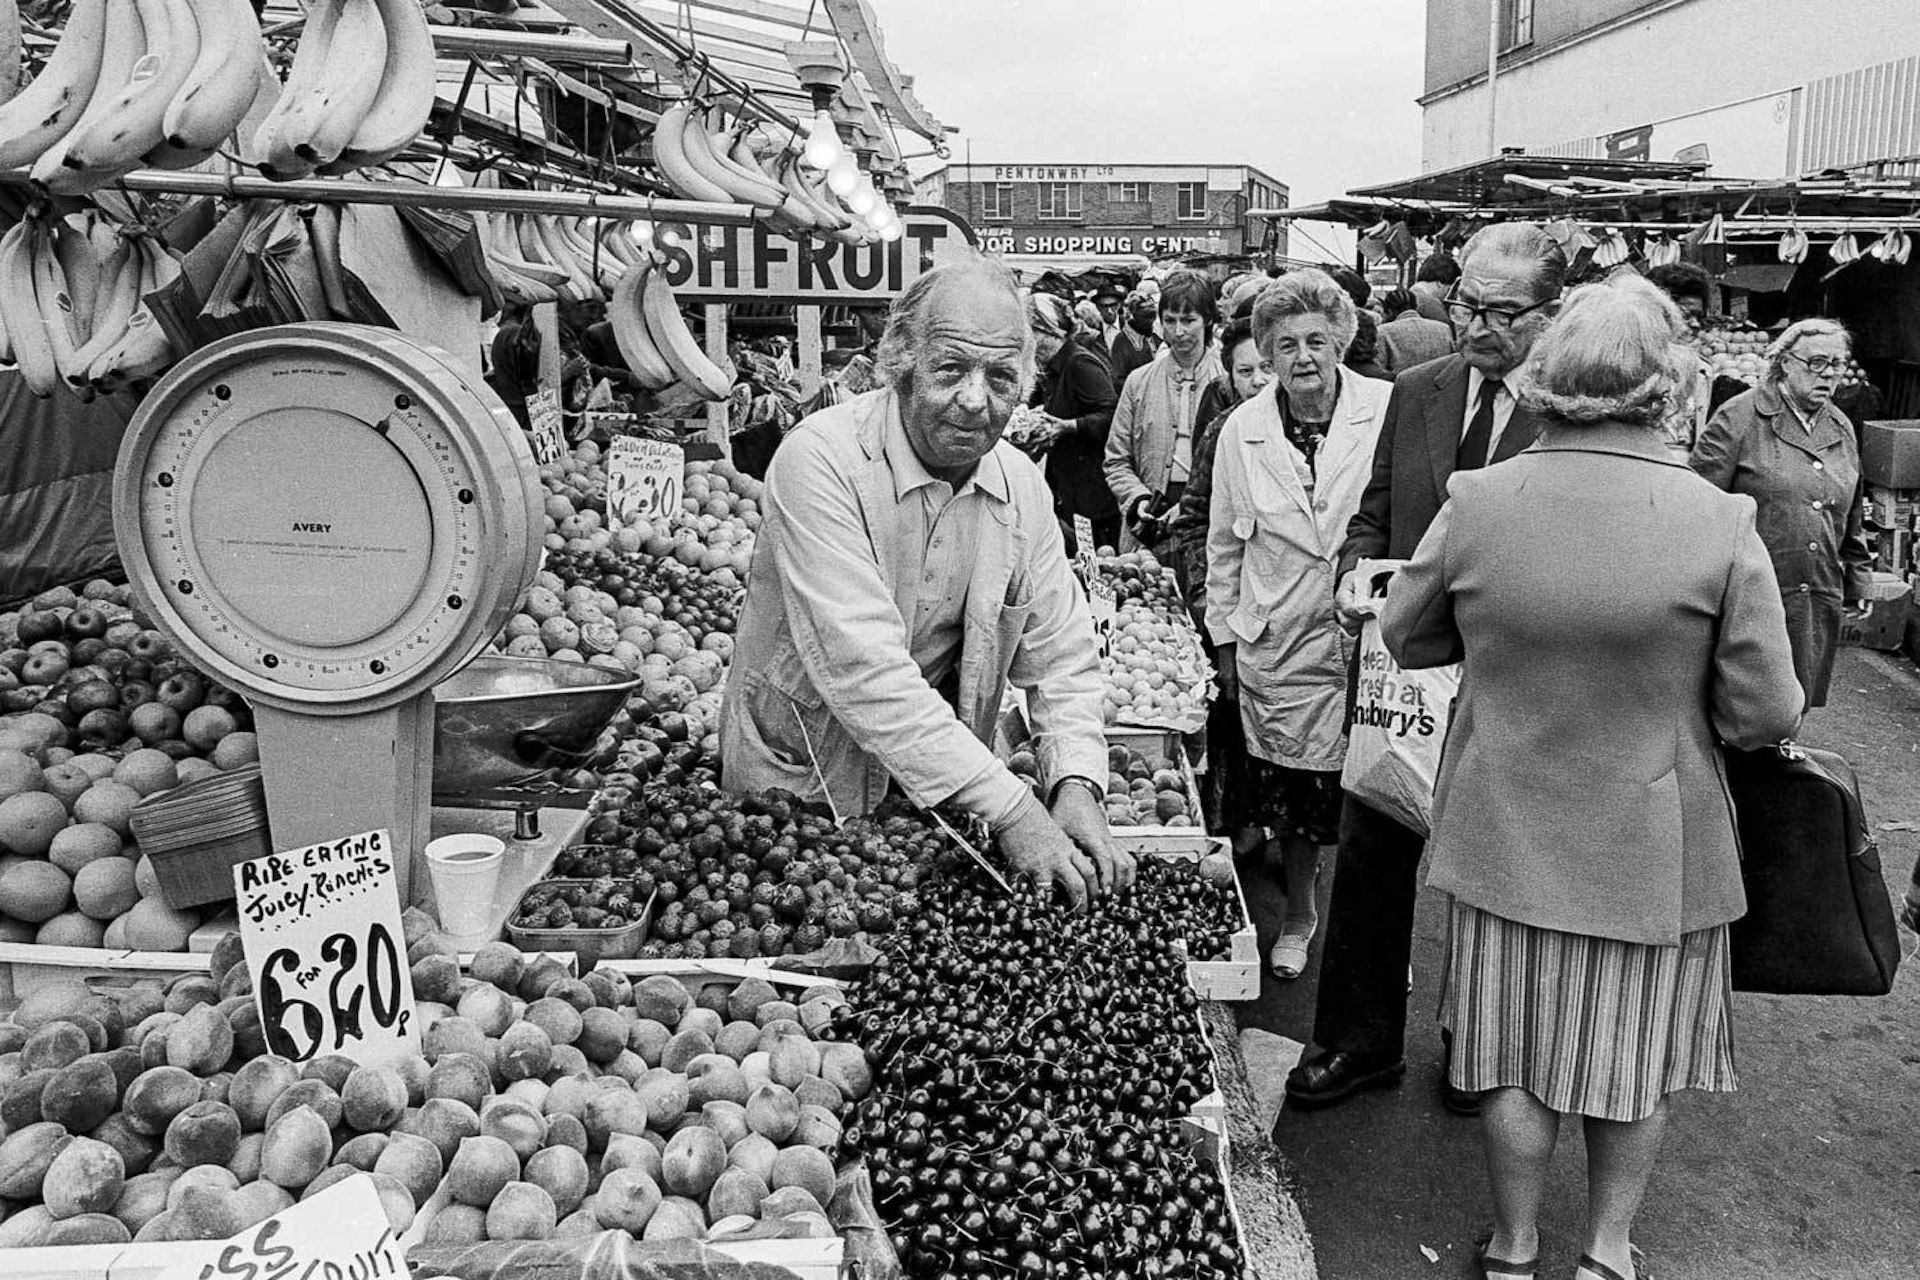 Black and white photos of pre-gentrification Hackney